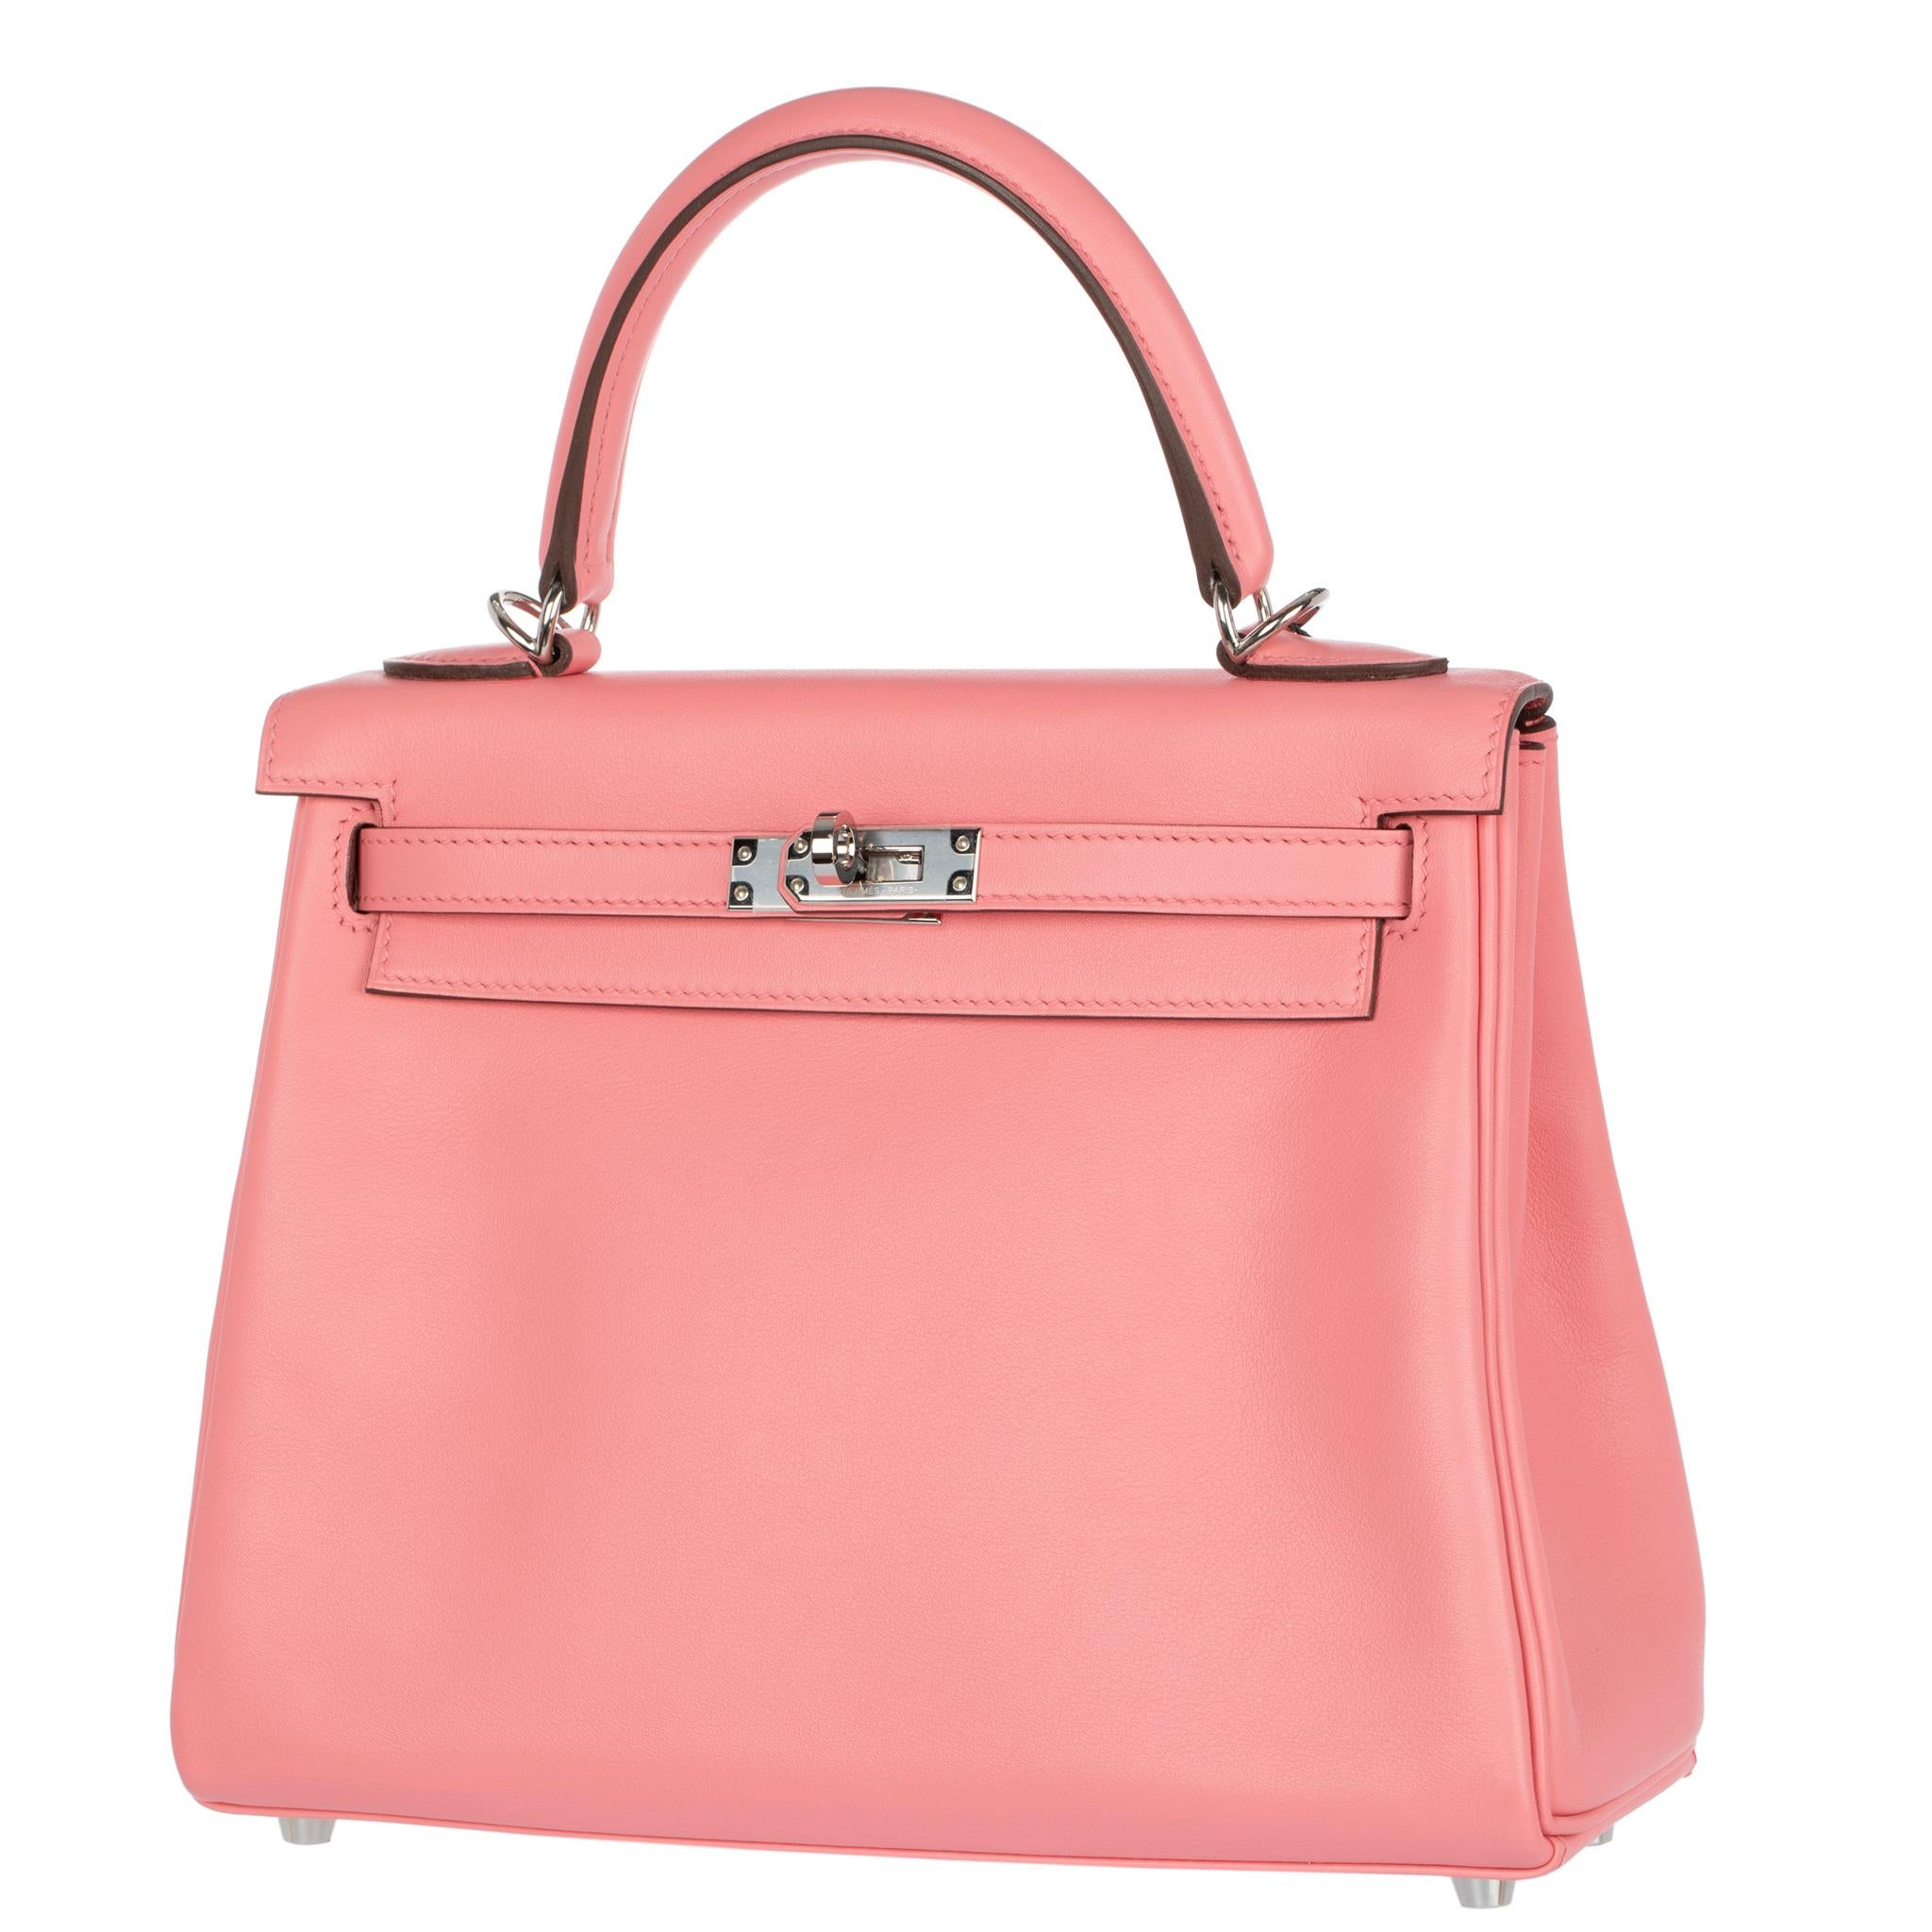 Hermes Kelly 25cm Retourne Rose Ete Swift Leather Palladium Hardware In New Condition For Sale In Sydney, New South Wales